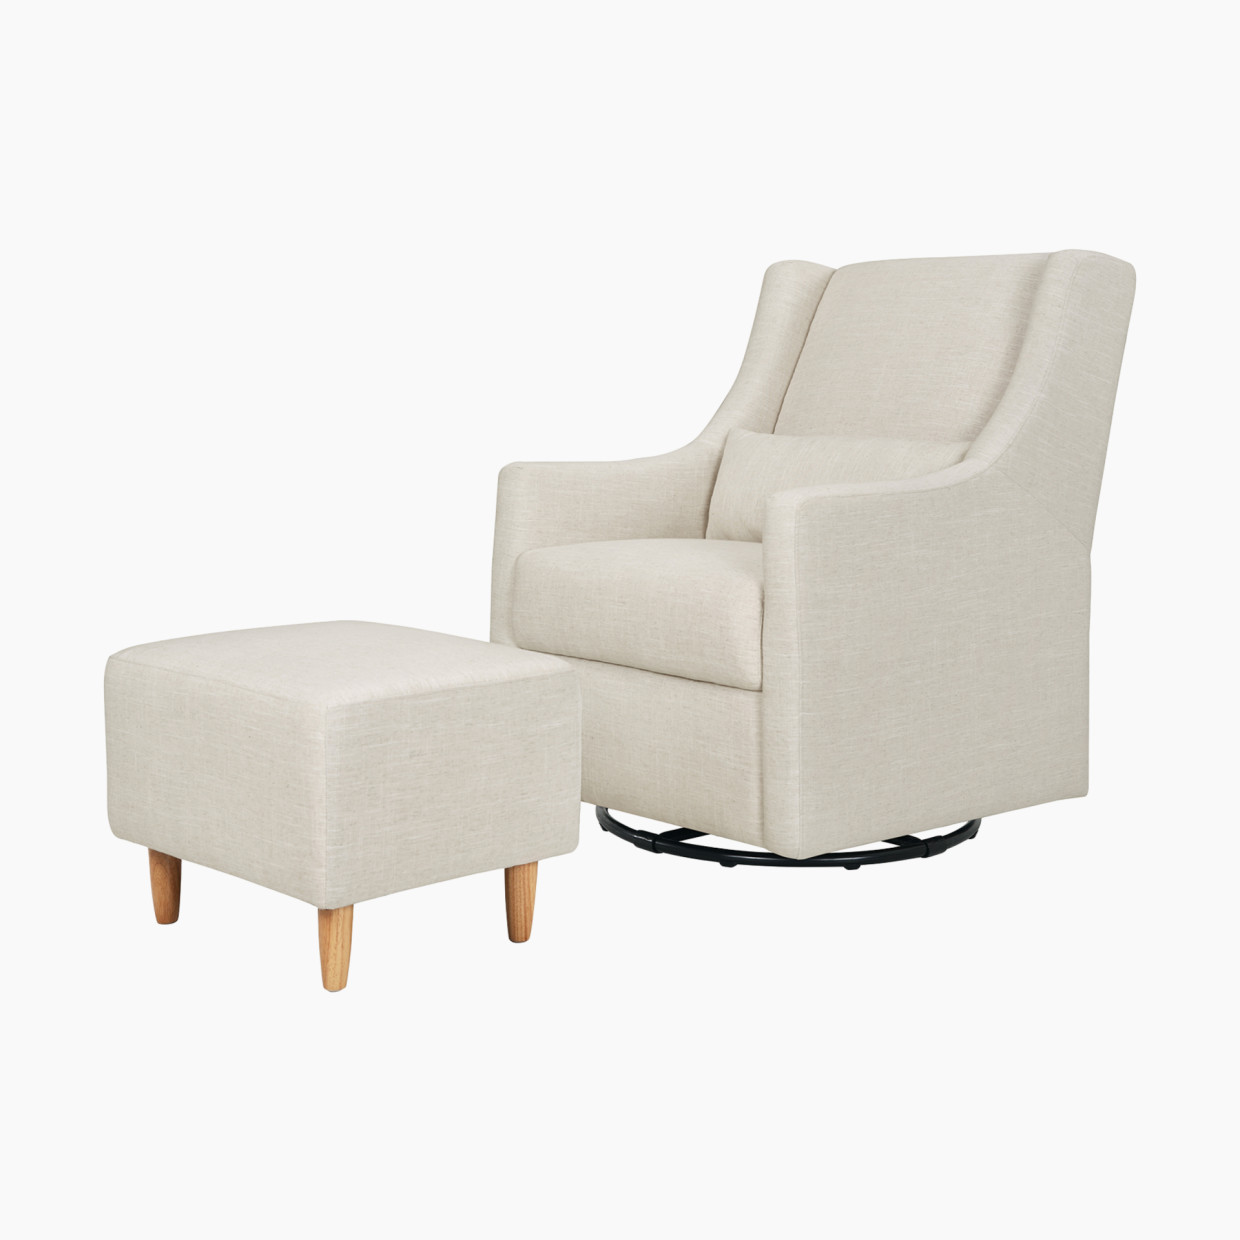 babyletto Toco Swivel Glider and Stationary Ottoman - White Linen.